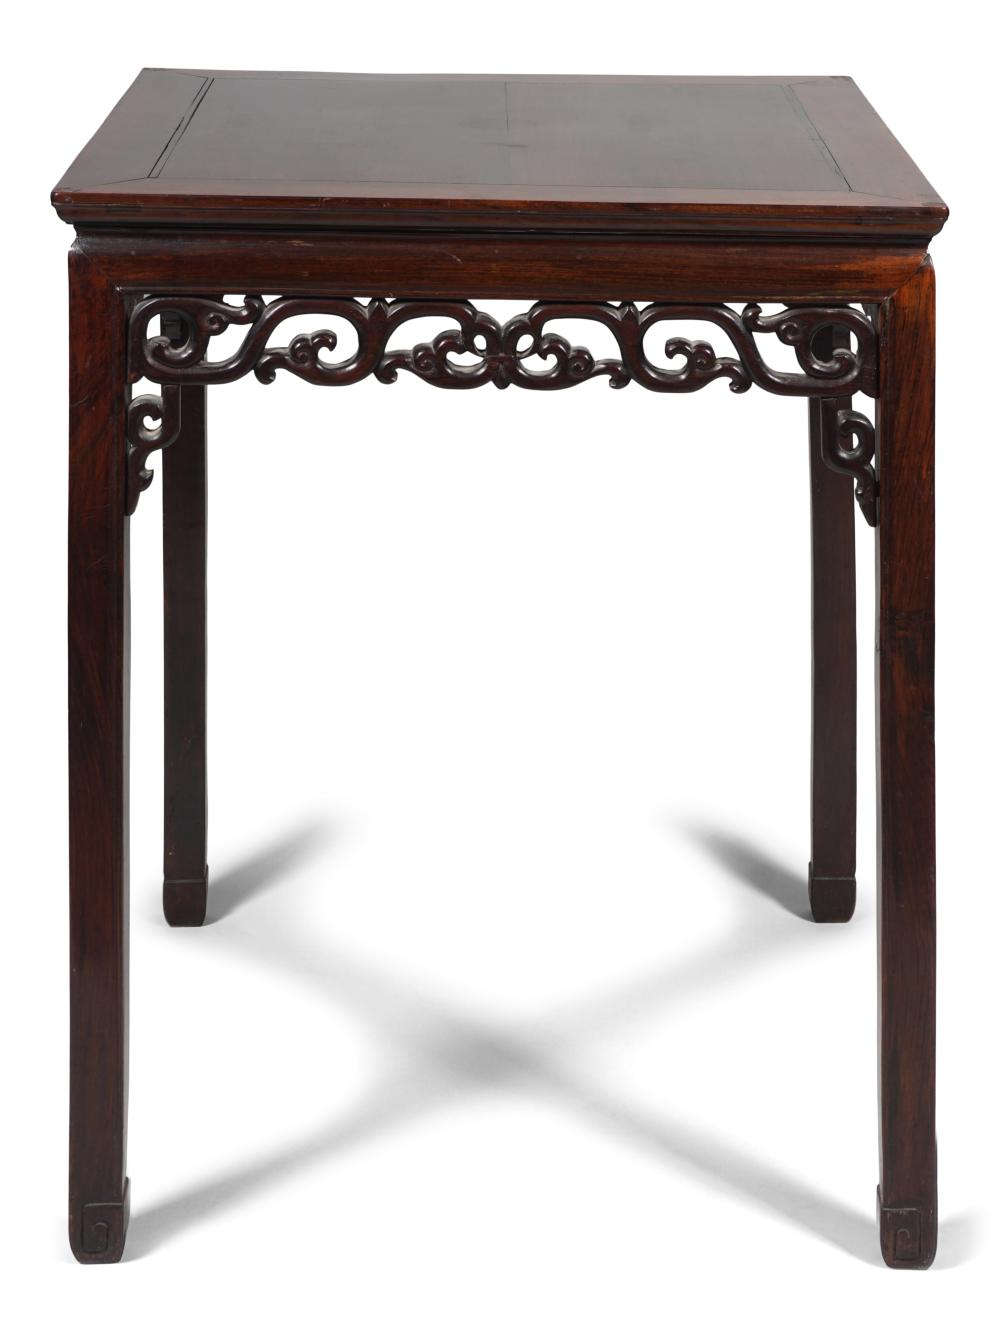 CHINESE HARDWOOD SIDE TABLE, 19TH